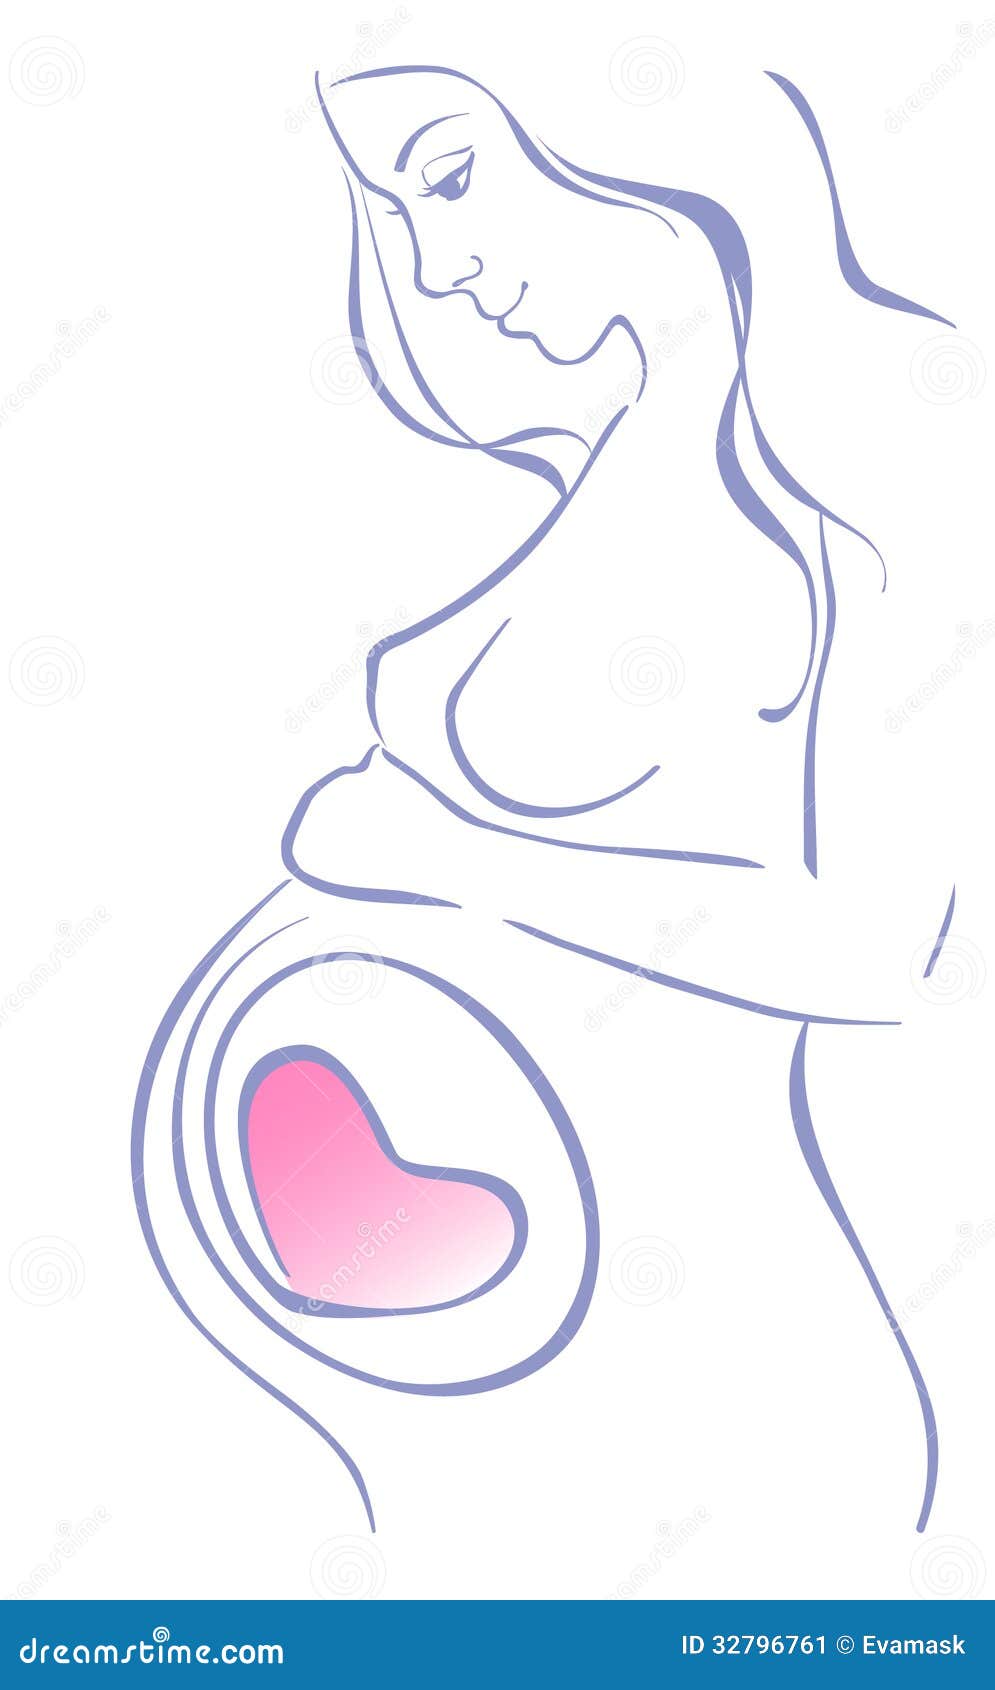 Line Drawing Pregnant Woman Stock Image - Image: 32796761